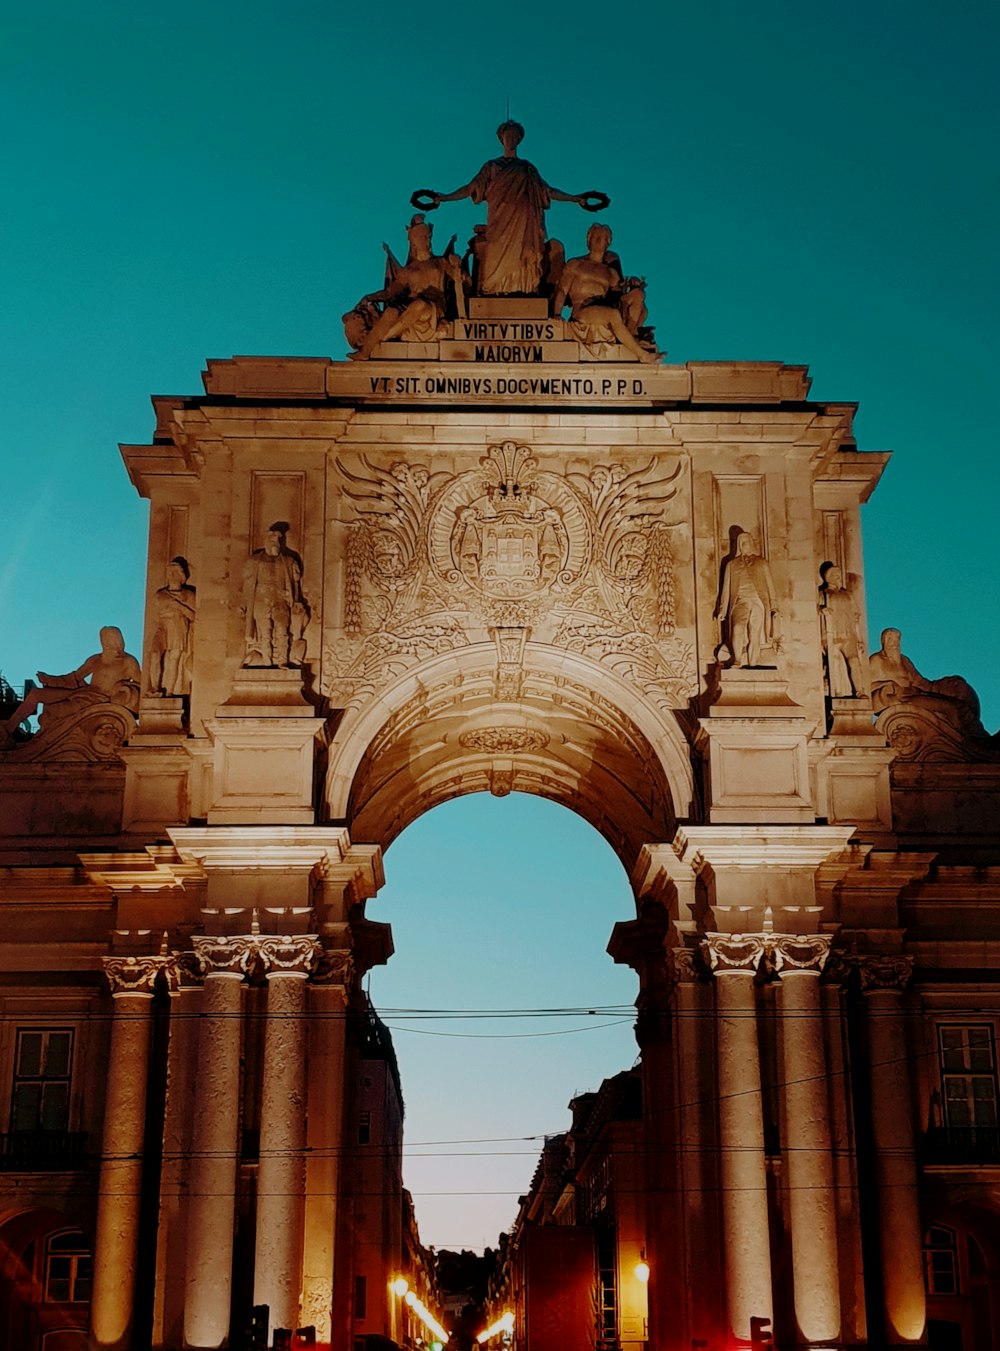 a large arch with a statue on top of it